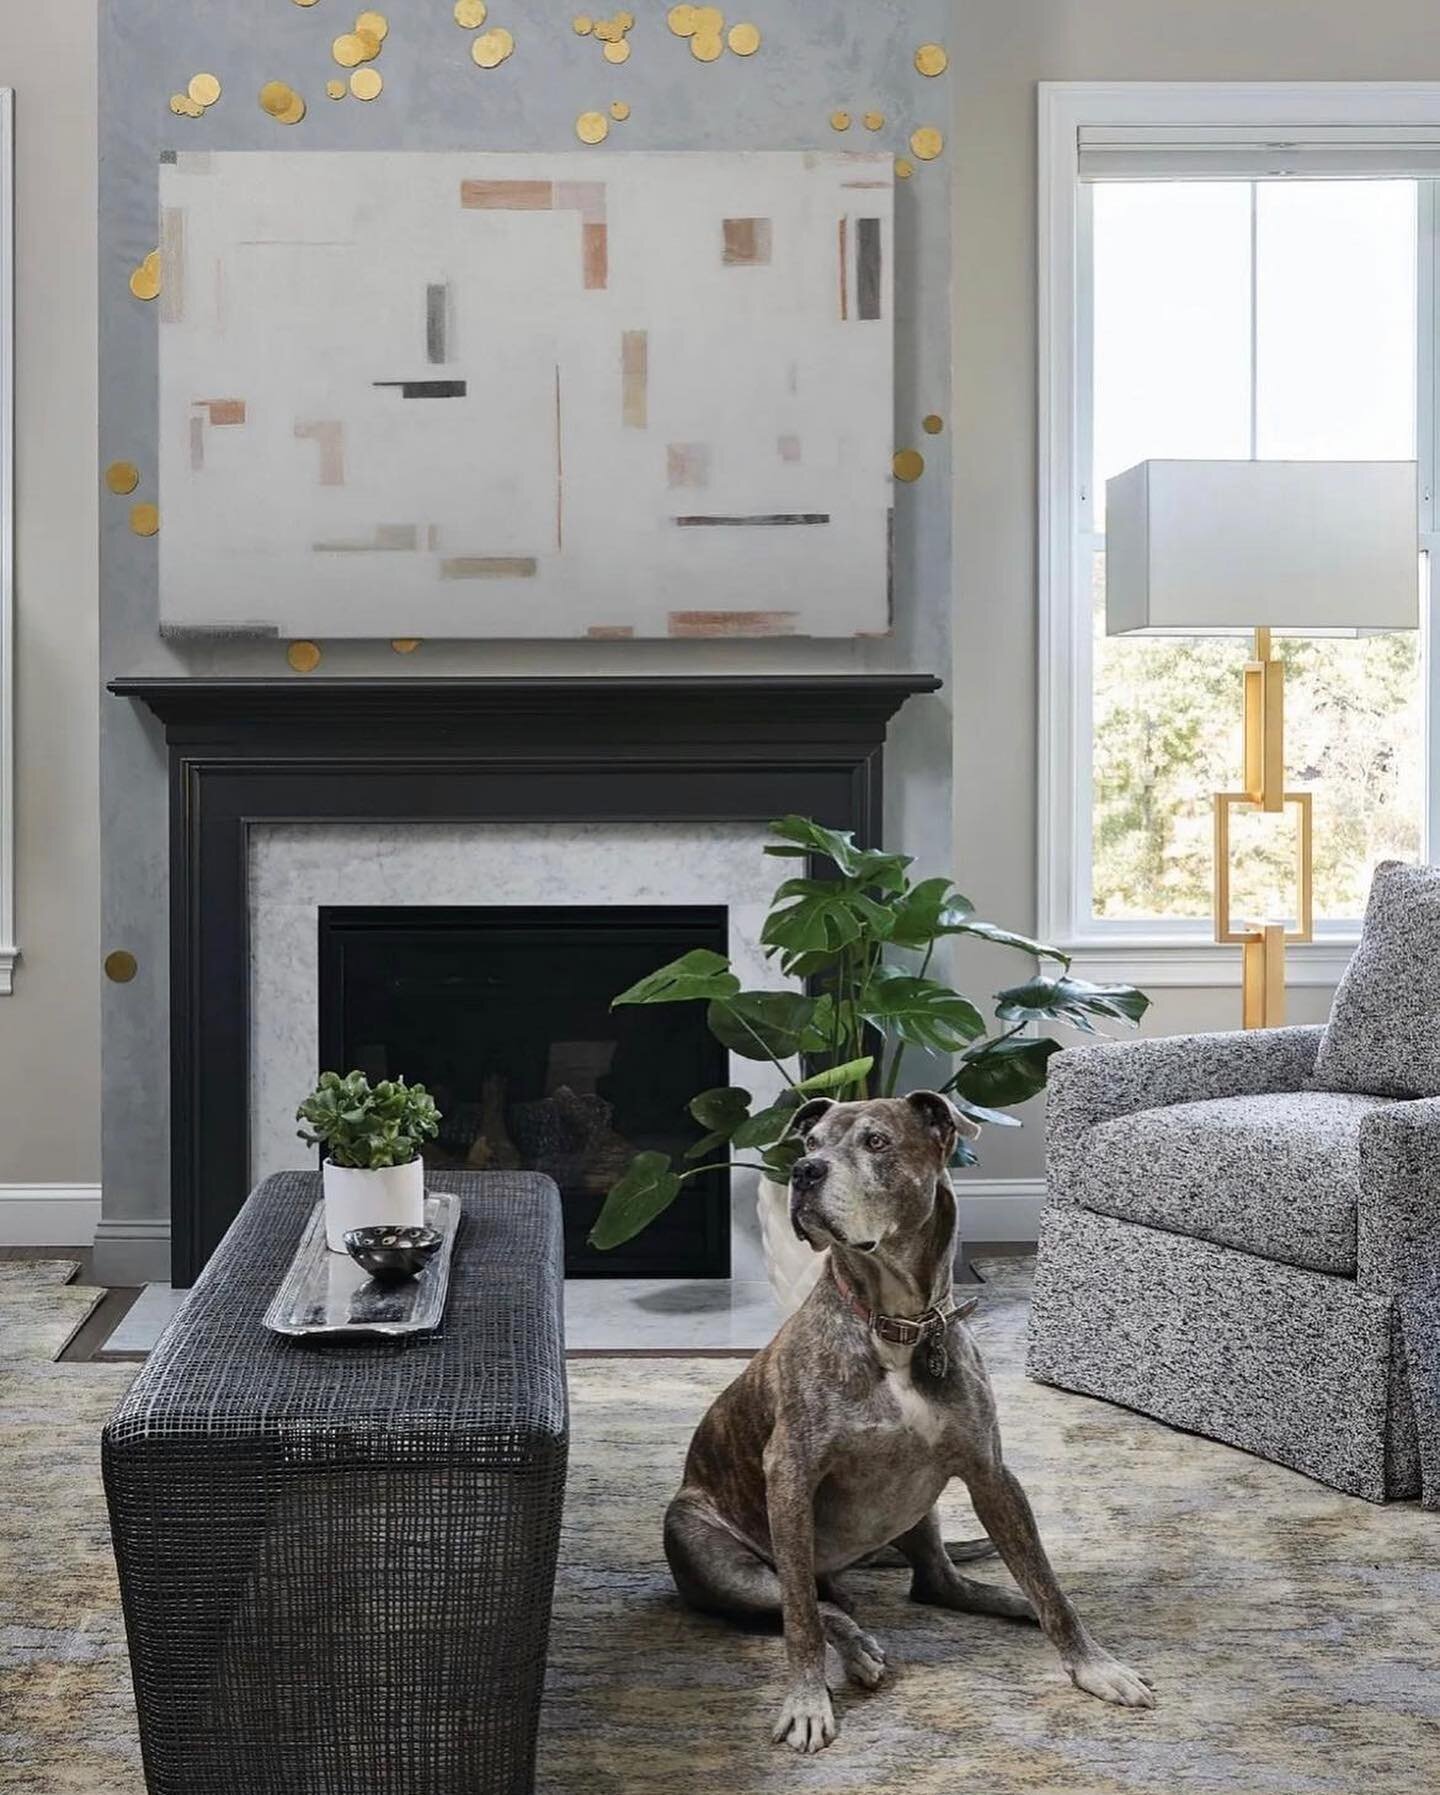 &ldquo;Why does watching a dog be a dog fill one with happiness? 
&mdash; Jonathan Safran Foer 

Such a handsome boy Charlie is. This image carried by @seanlitchfield brings me so much delight. 

As seen in @mlinteriorsbos 
@modernluxury 

Follow #th